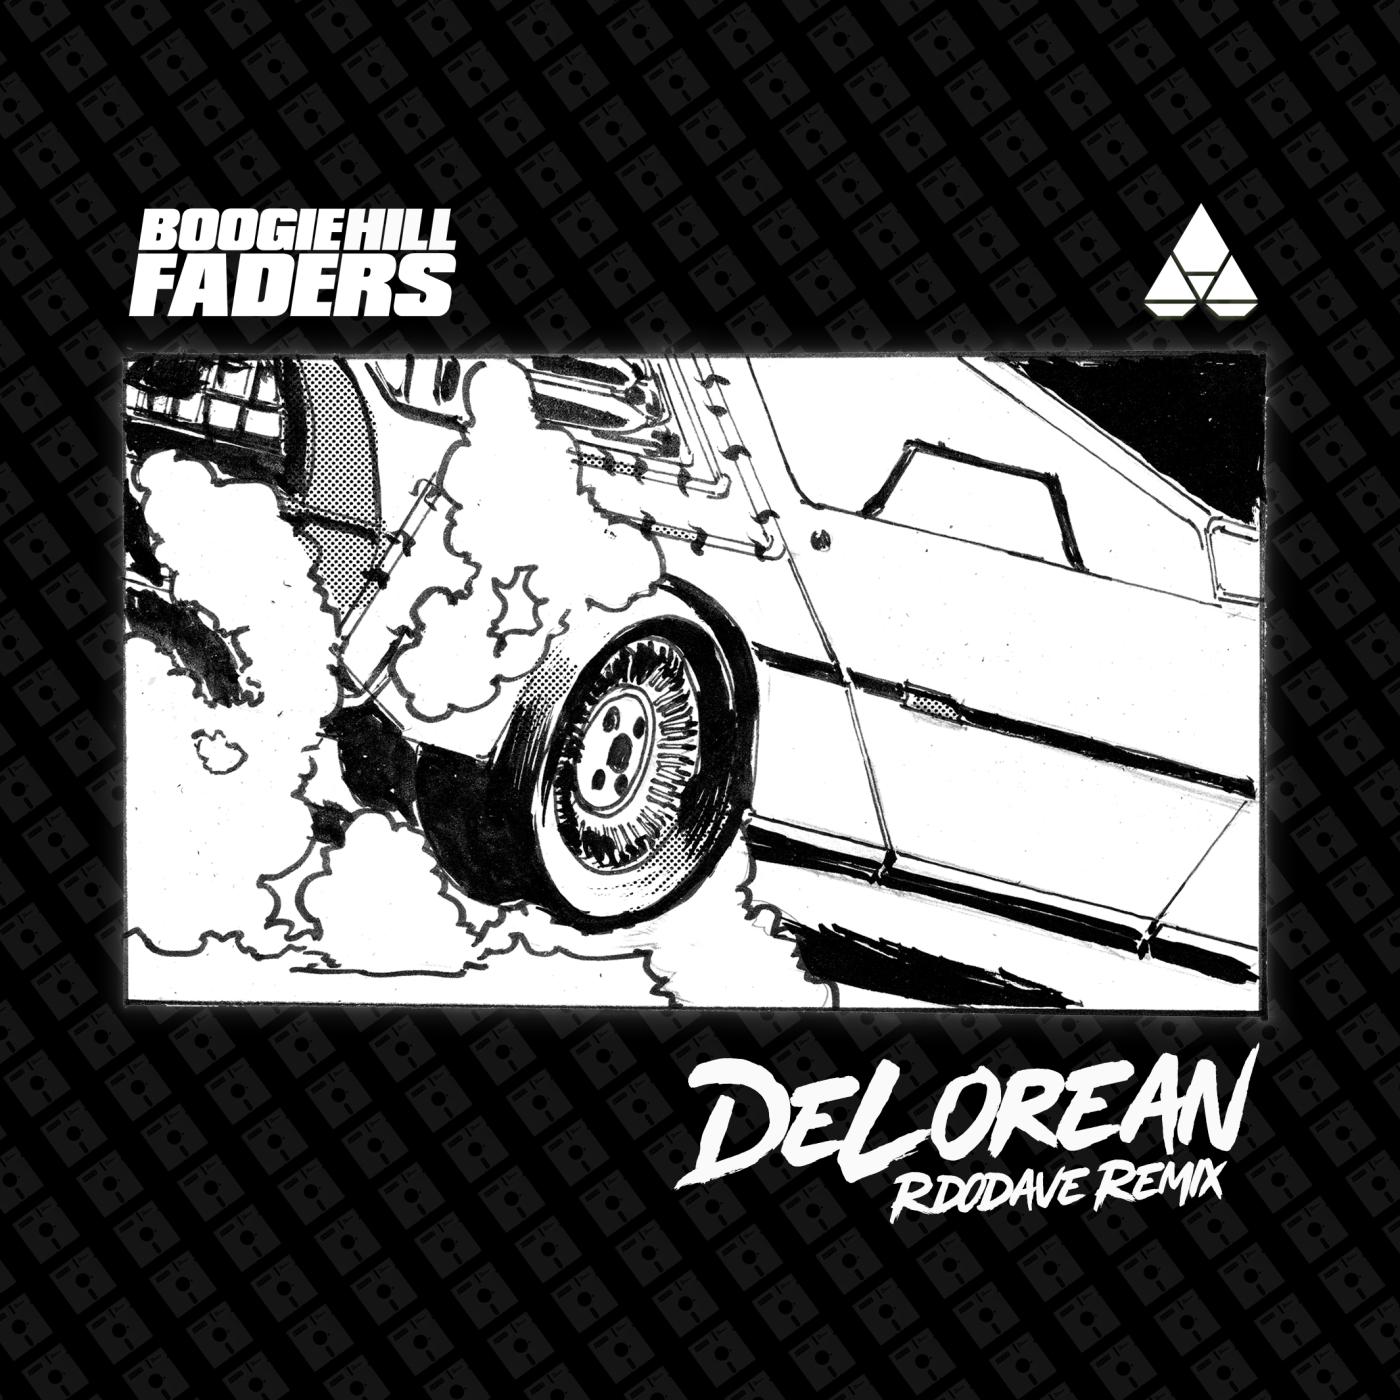 Boogie Hill Faders - Delorean (Rd0Dave Remix)